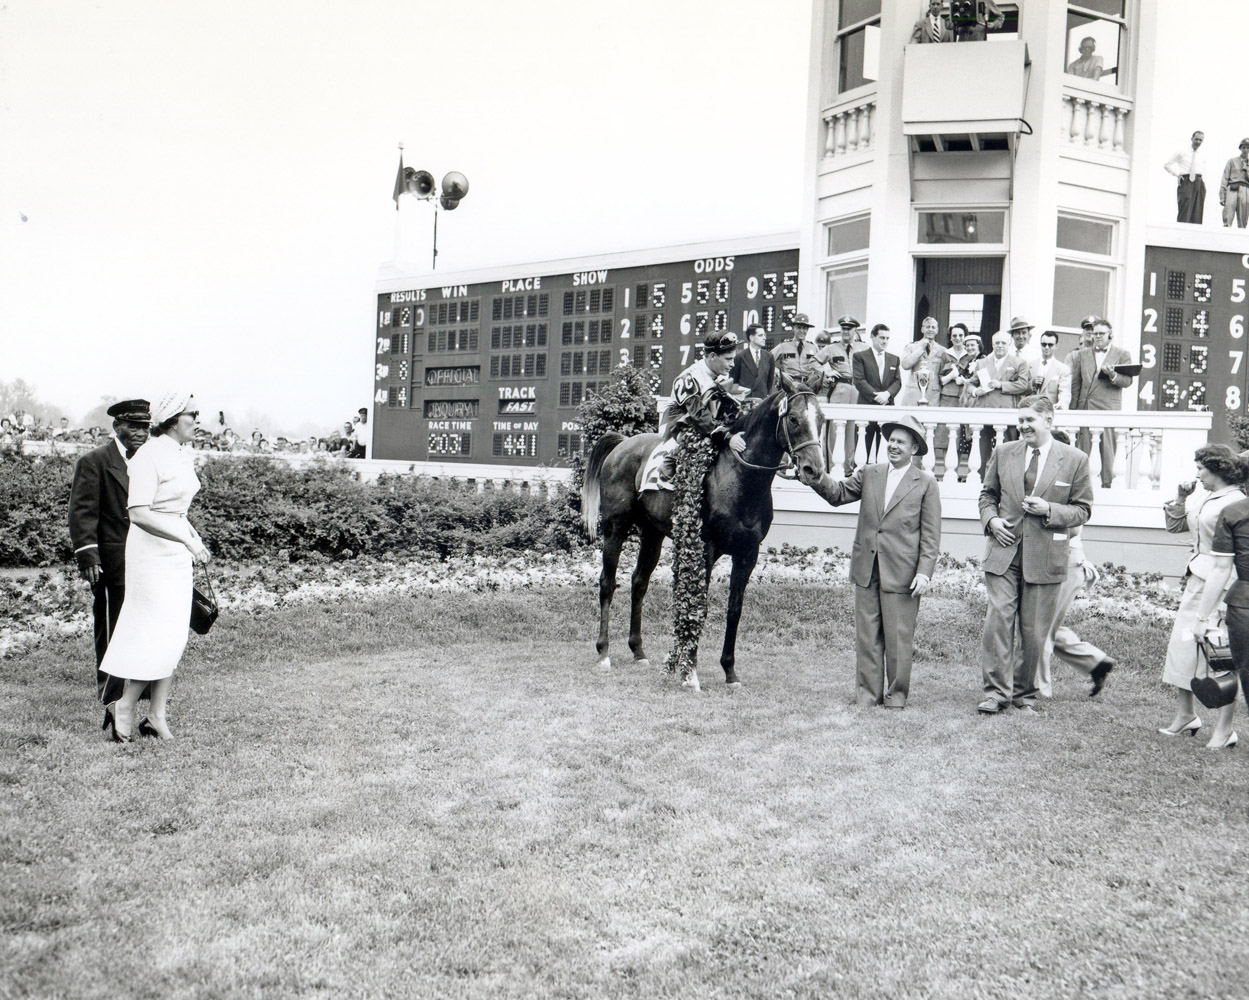 The winning connections of Determine, including trainer William Molter, celebrate in the winner's circle after winning the 1954 Kentucky Derby (Churchill Downs Inc./Kinetic Corp. /Museum Collection)